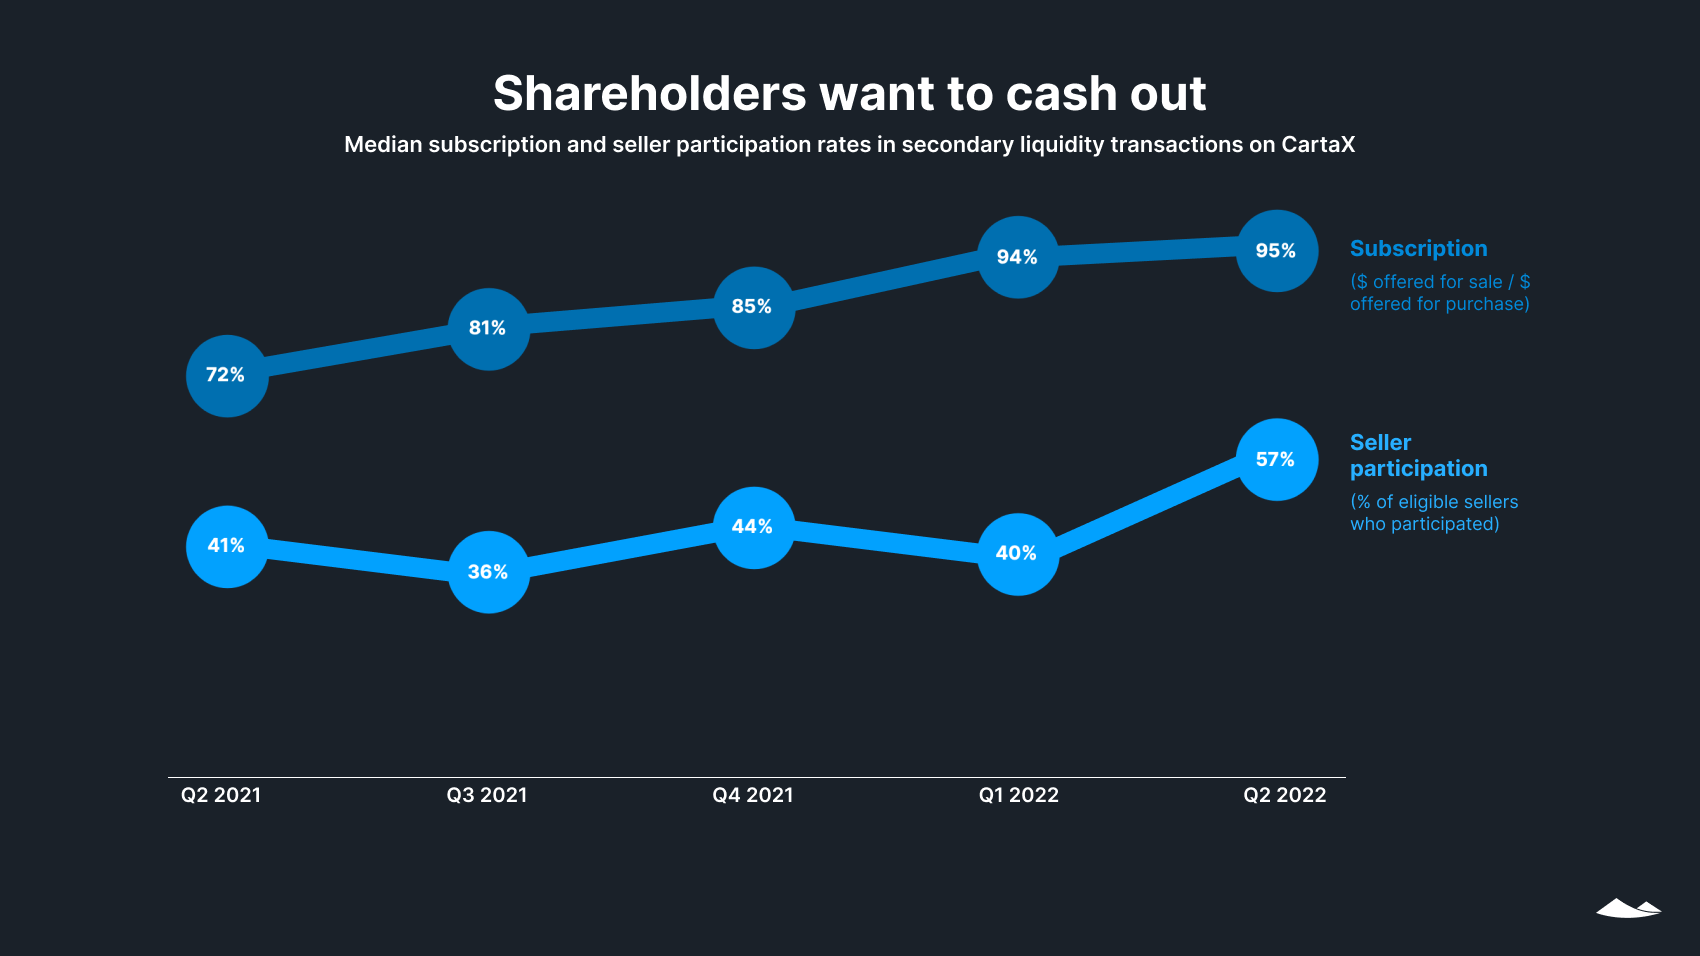 Shareholders want to cash out: Median subscription and participation rates in secondary liquidity transactions on CartaX.